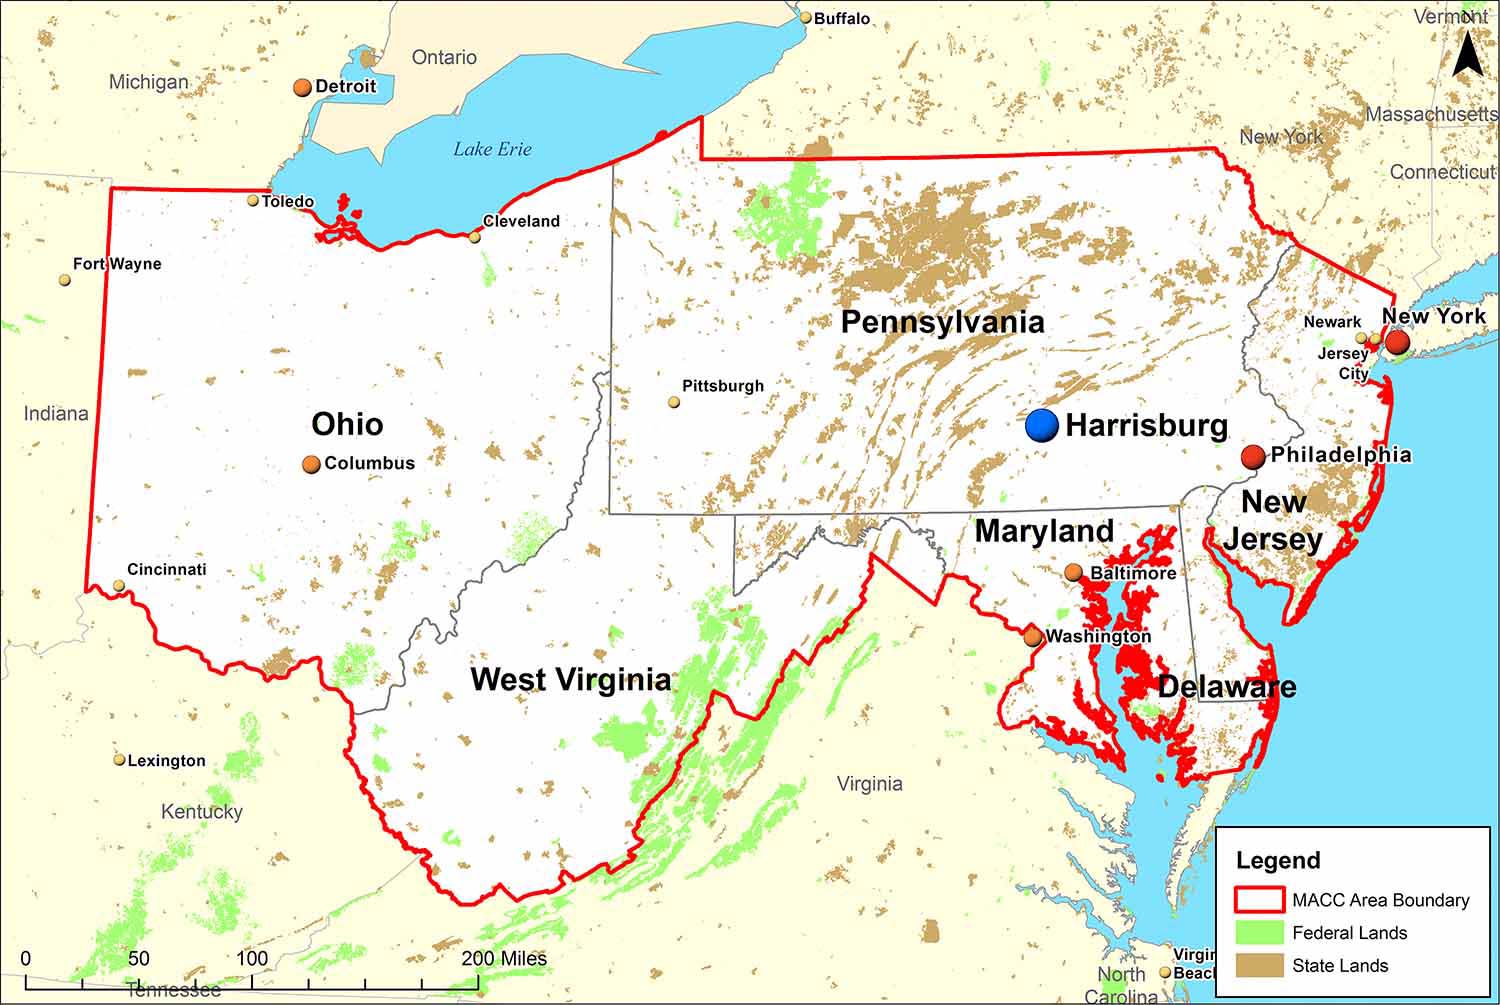 An area map with the states of the Mid-Atlantic area highlighted.